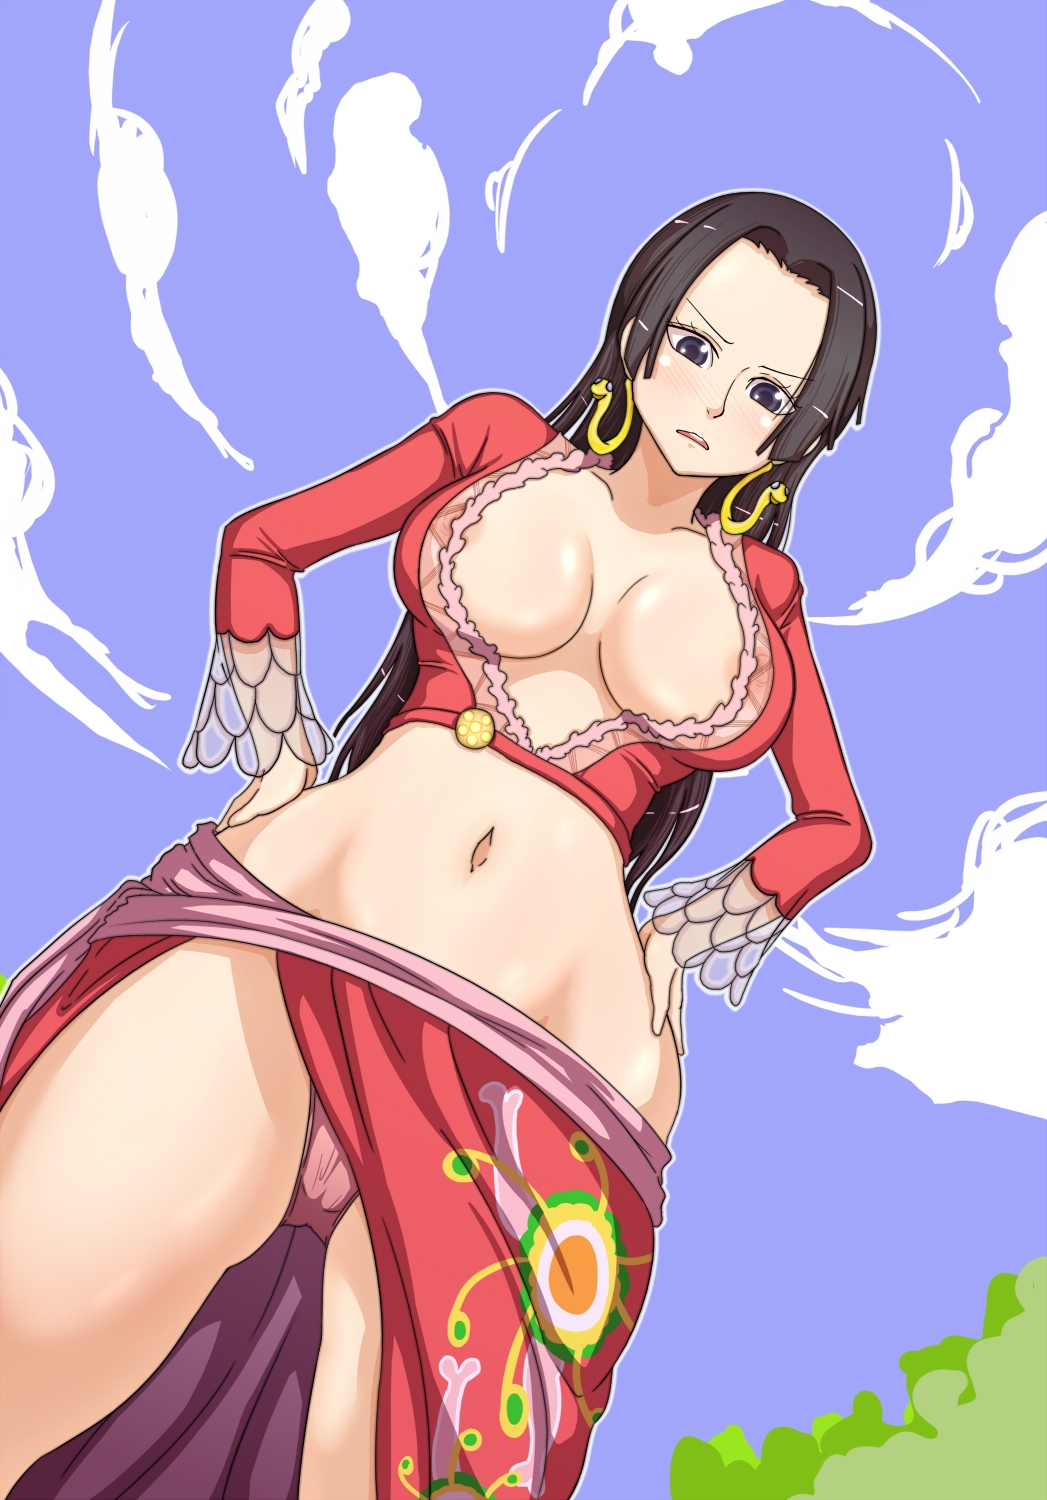 1047px x 1500px - Toon sex pic ##0001301018877 female boa hancock cleavage from below one  piece panties pink panties | One Piece Hentai